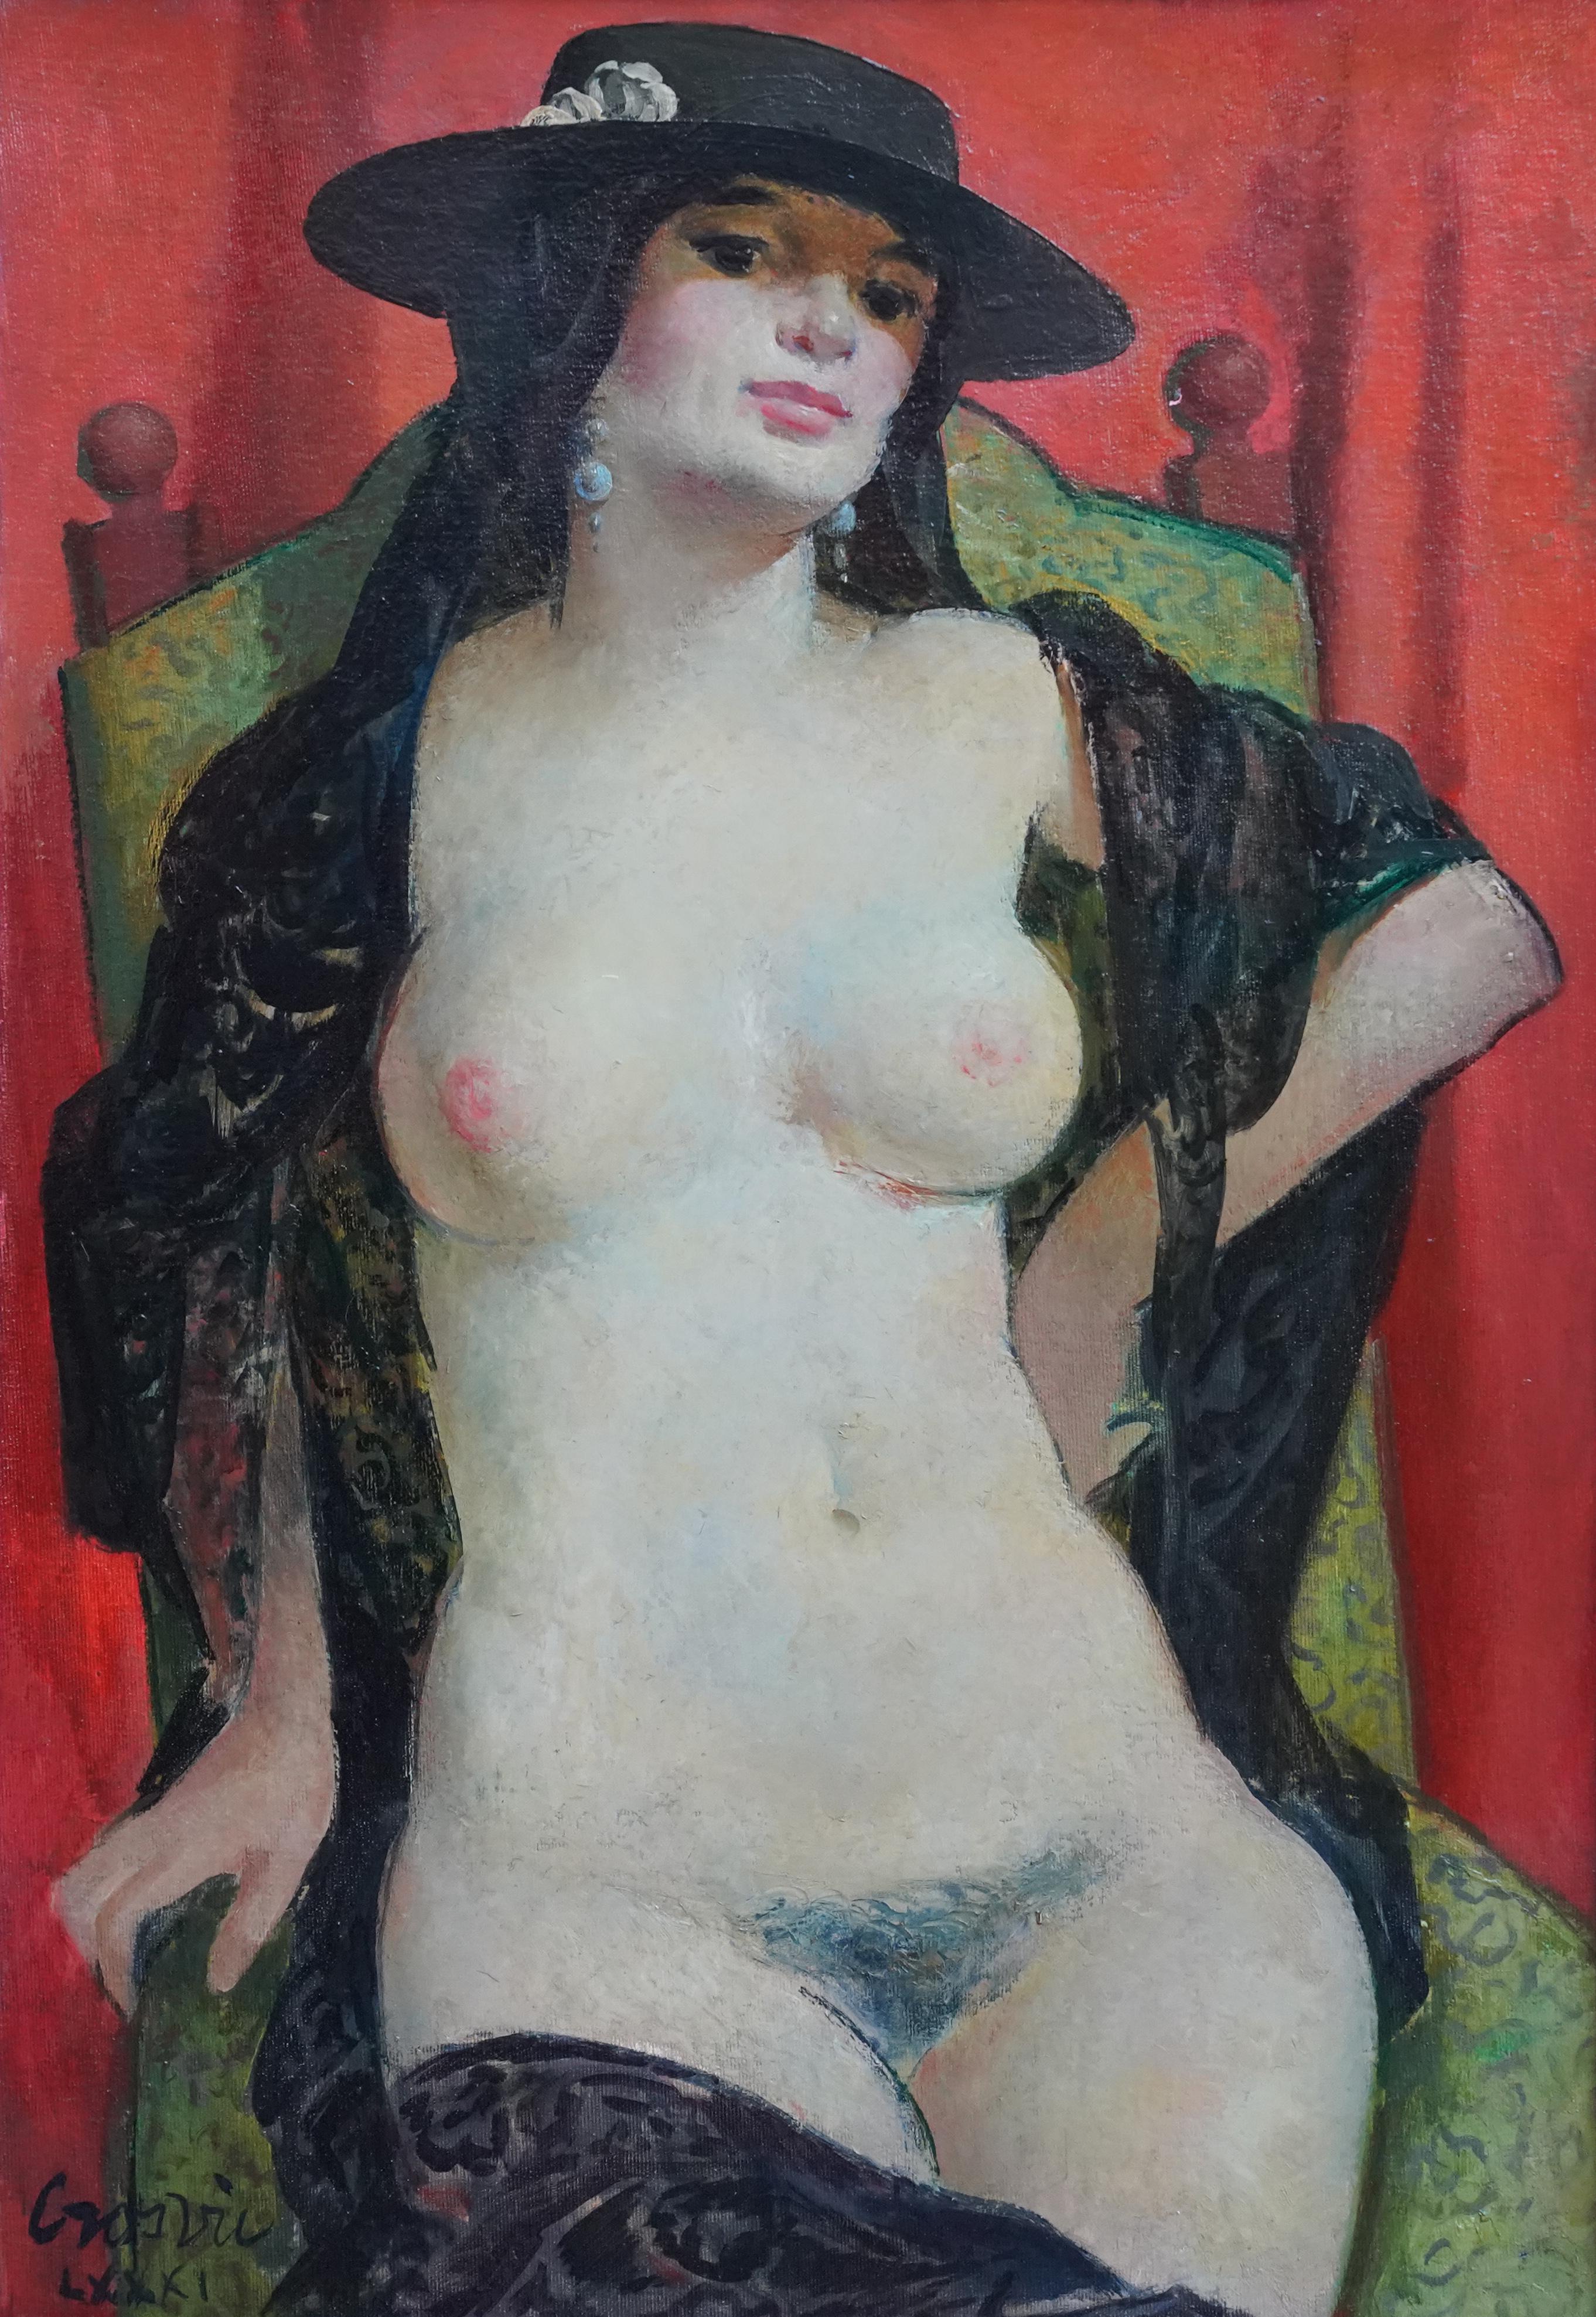 Nude Portrait of a Spanish Woman - Scottish art female portrait oil painting - Painting by William Crosbie